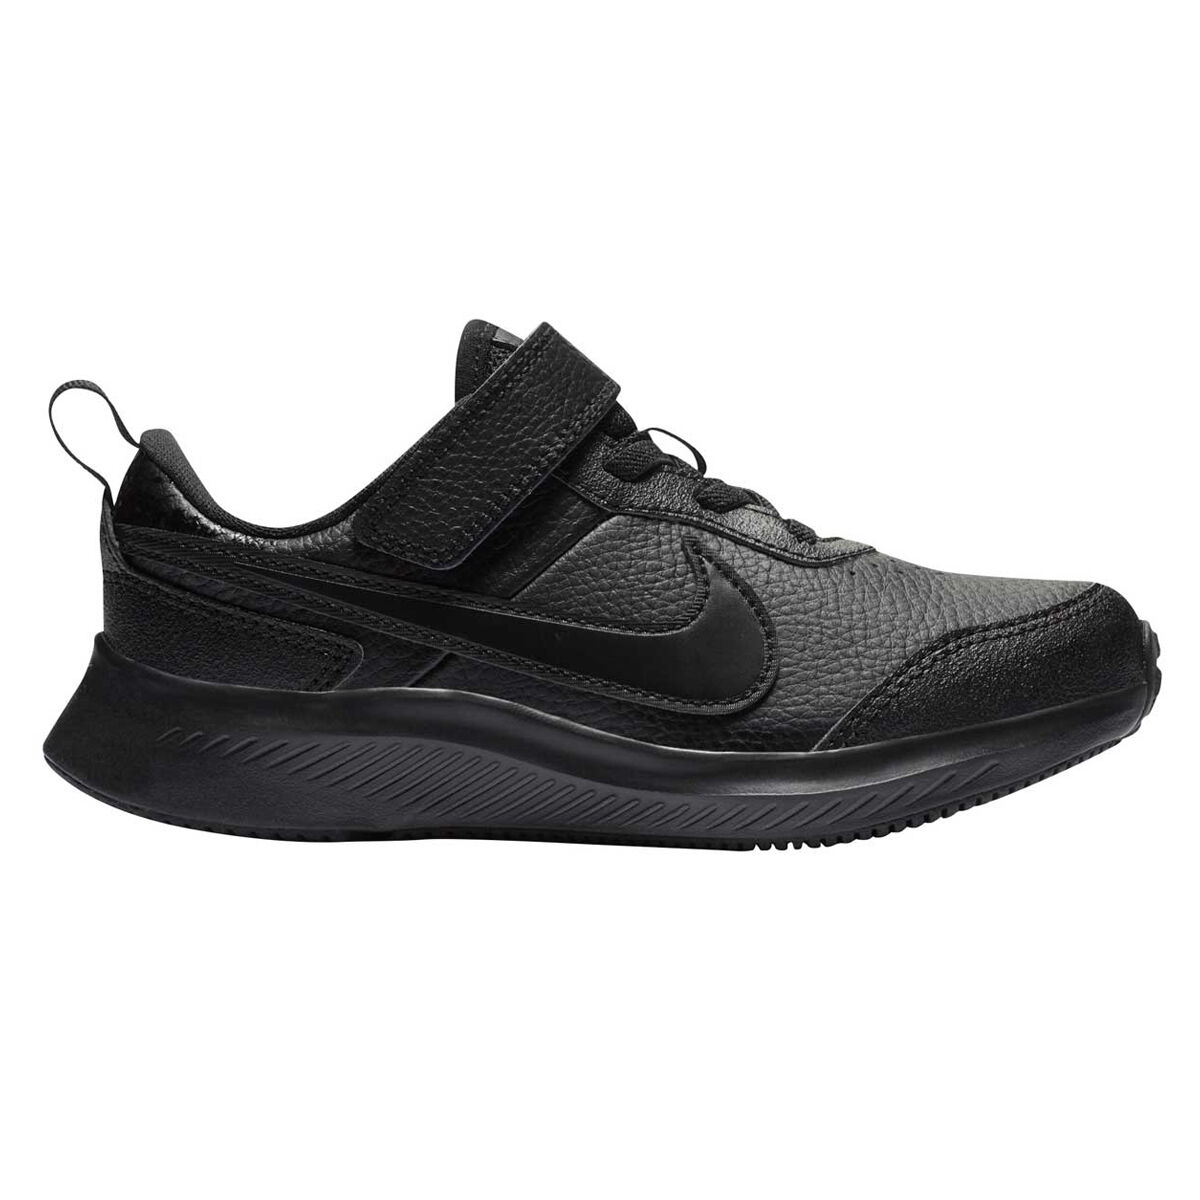 Nike Varsity Leather PS Kids Running Shoes